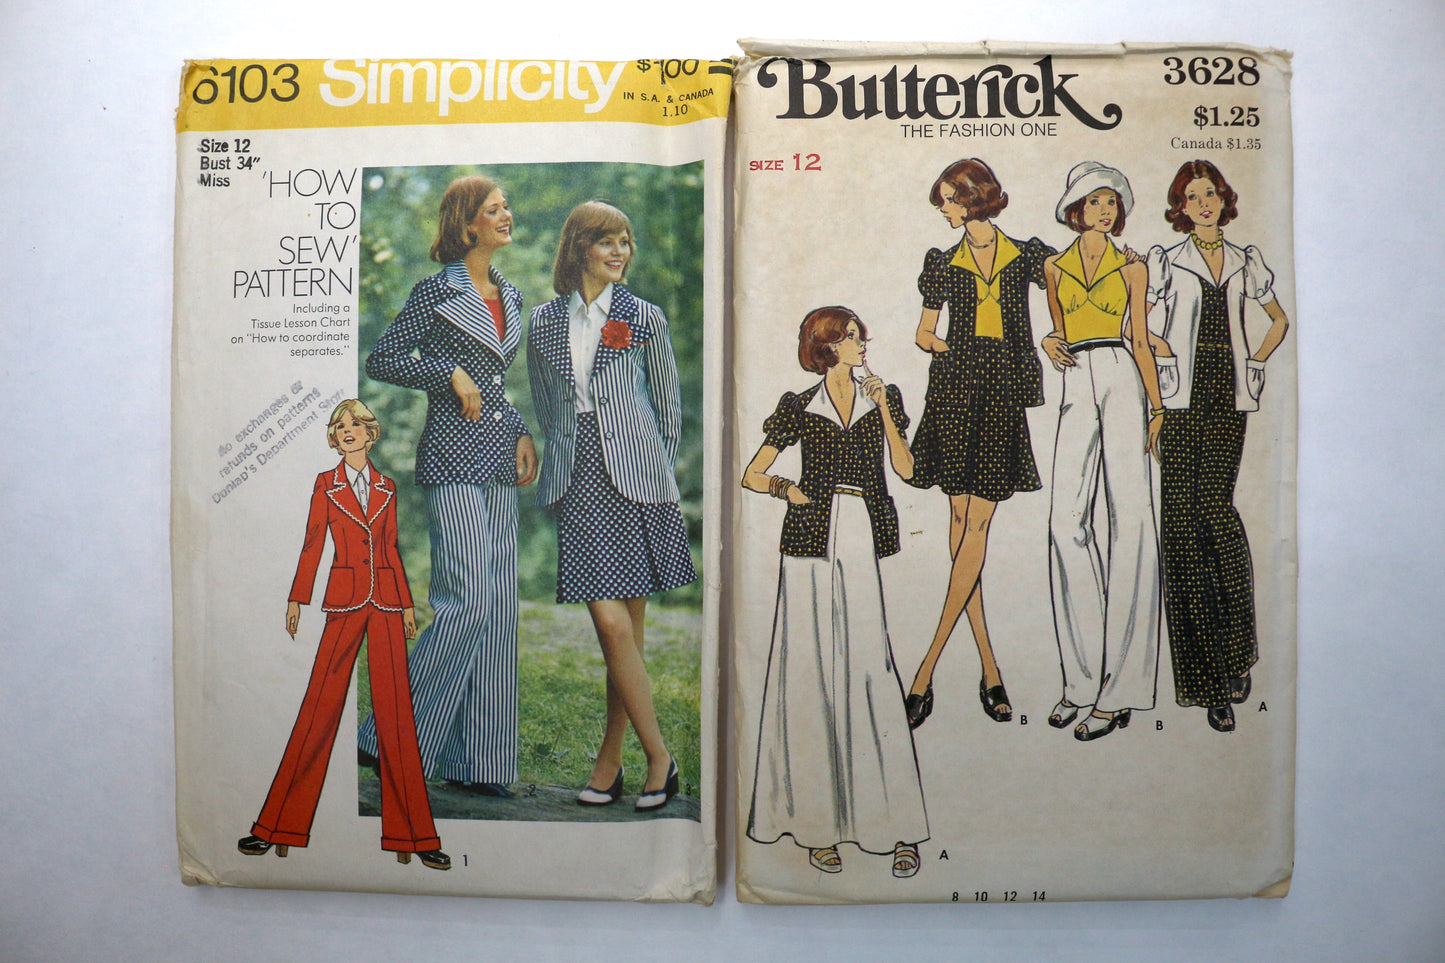 Butterick 3628 Womens Pants Sewing Pattern or Simplicity 6103 Womens Suit Sewing Pattern